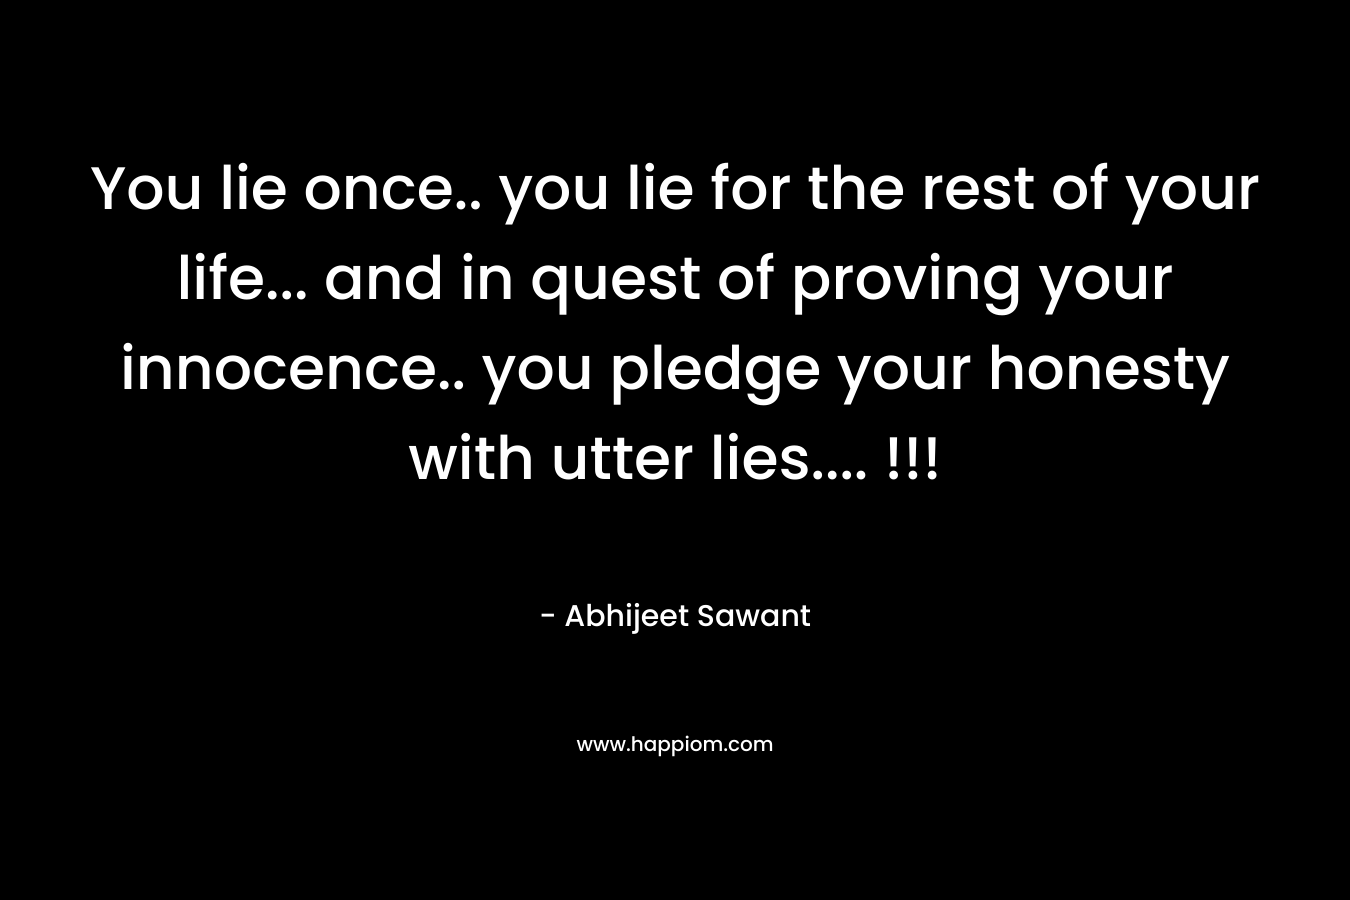 You lie once.. you lie for the rest of your life... and in quest of proving your innocence.. you pledge your honesty with utter lies.... !!!